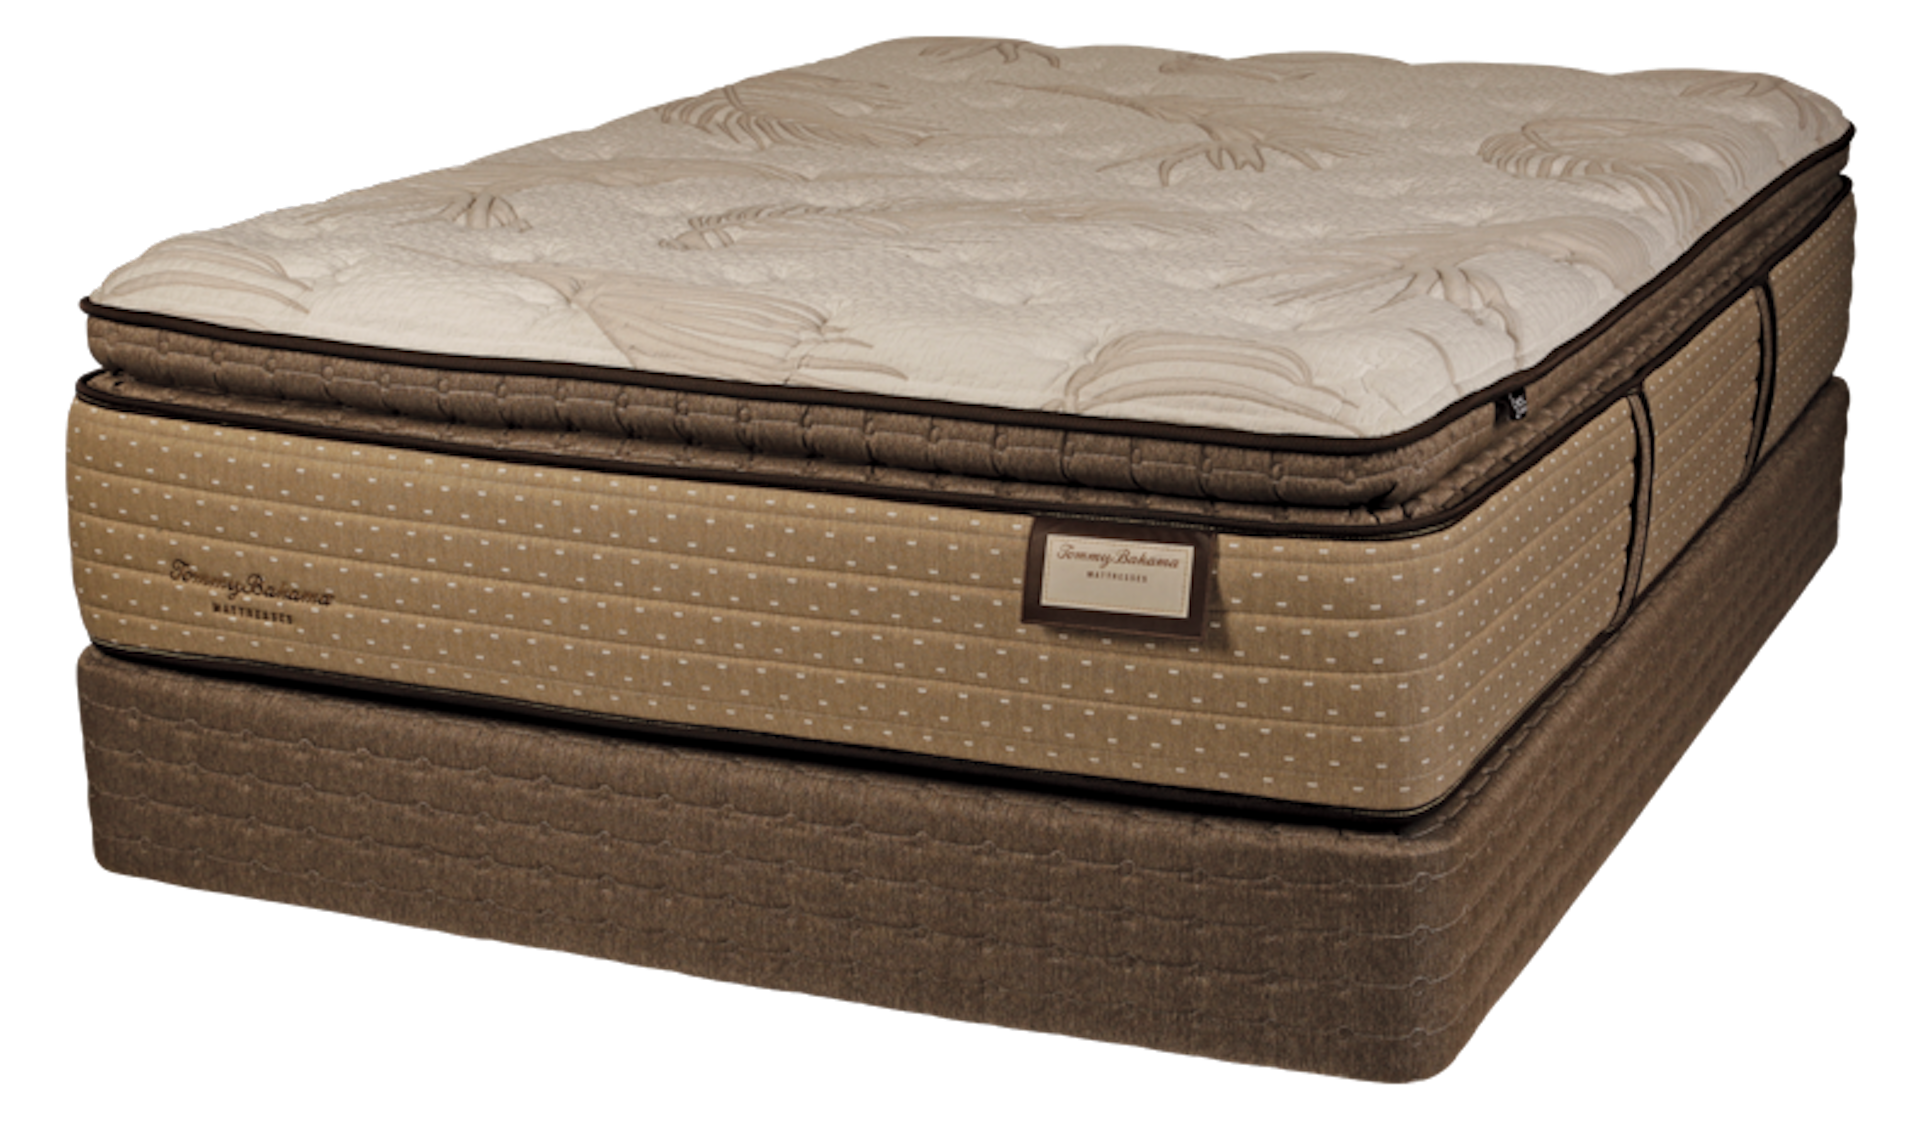 tommy bahama mattress prices